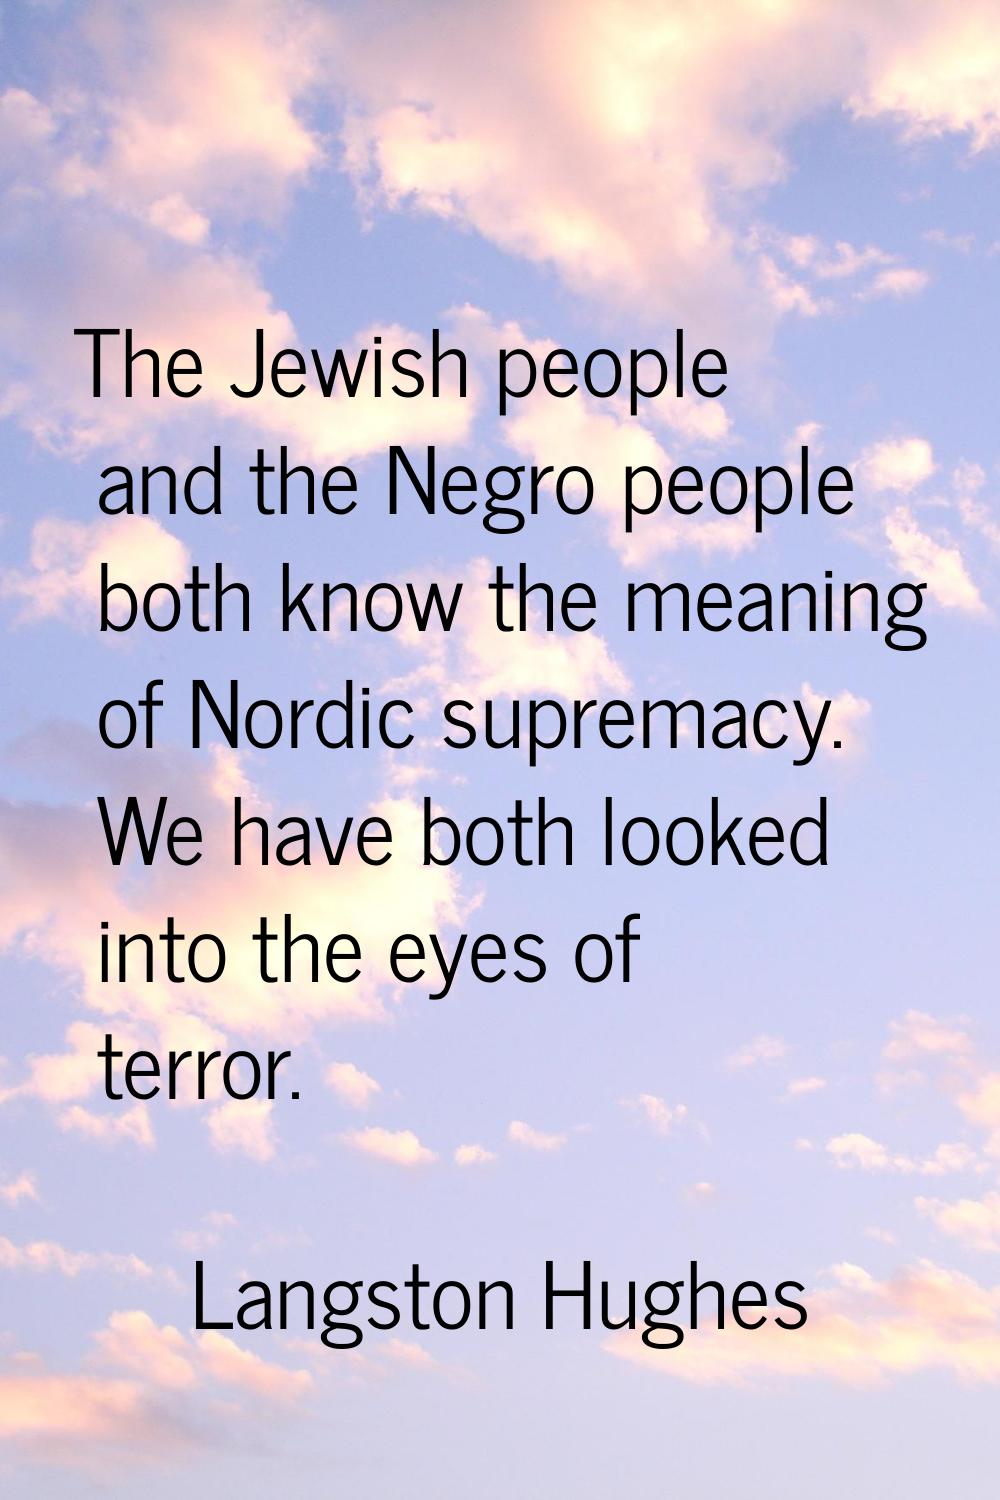 The Jewish people and the Negro people both know the meaning of Nordic supremacy. We have both look